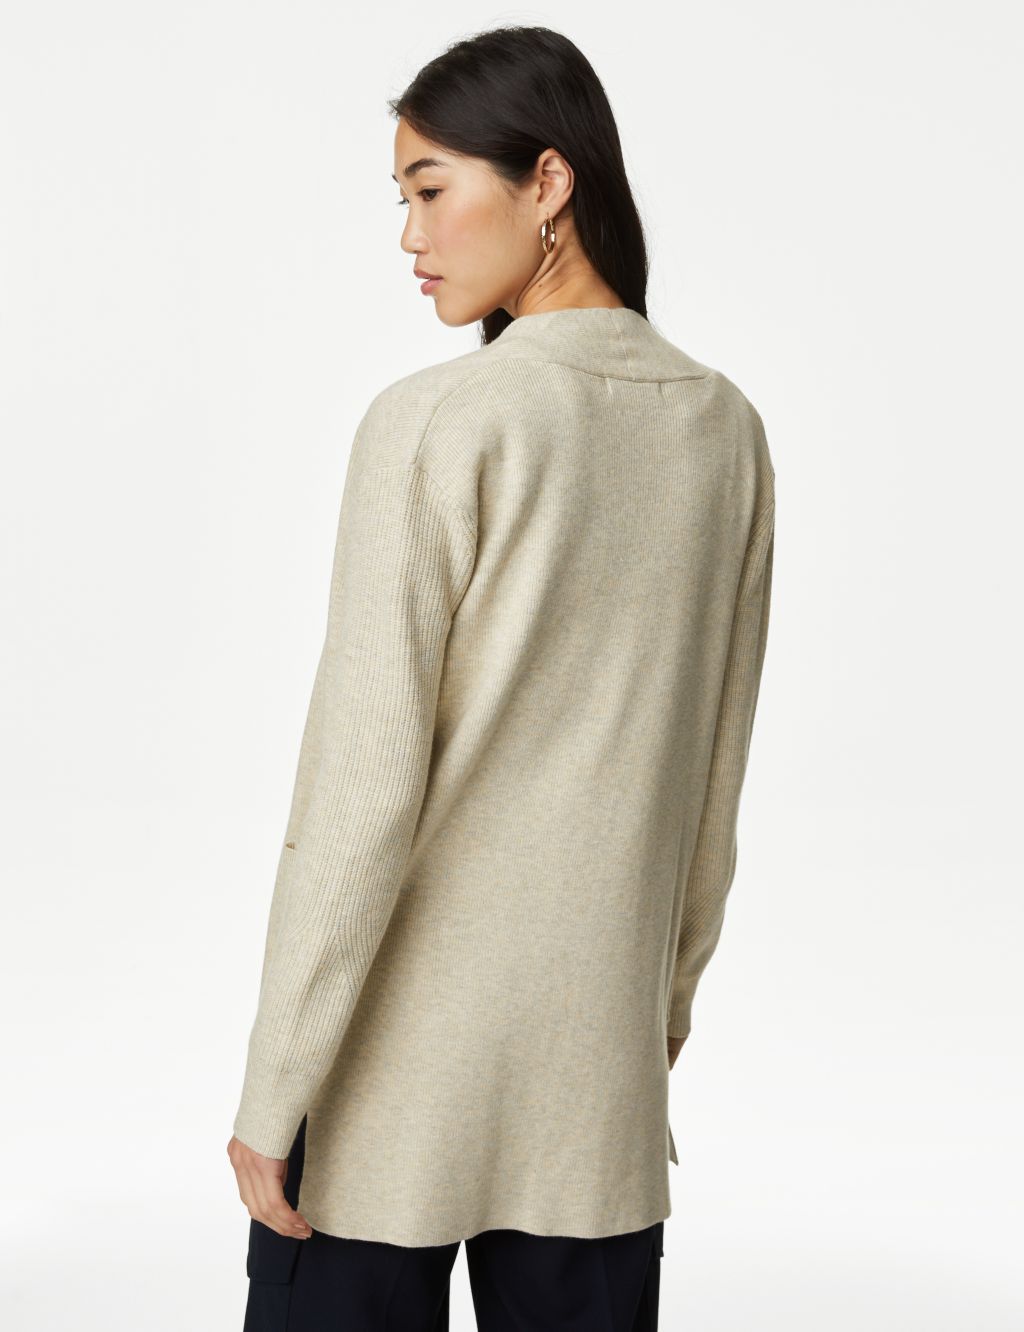 Soft Touch Knitted Longline Cardigan image 5